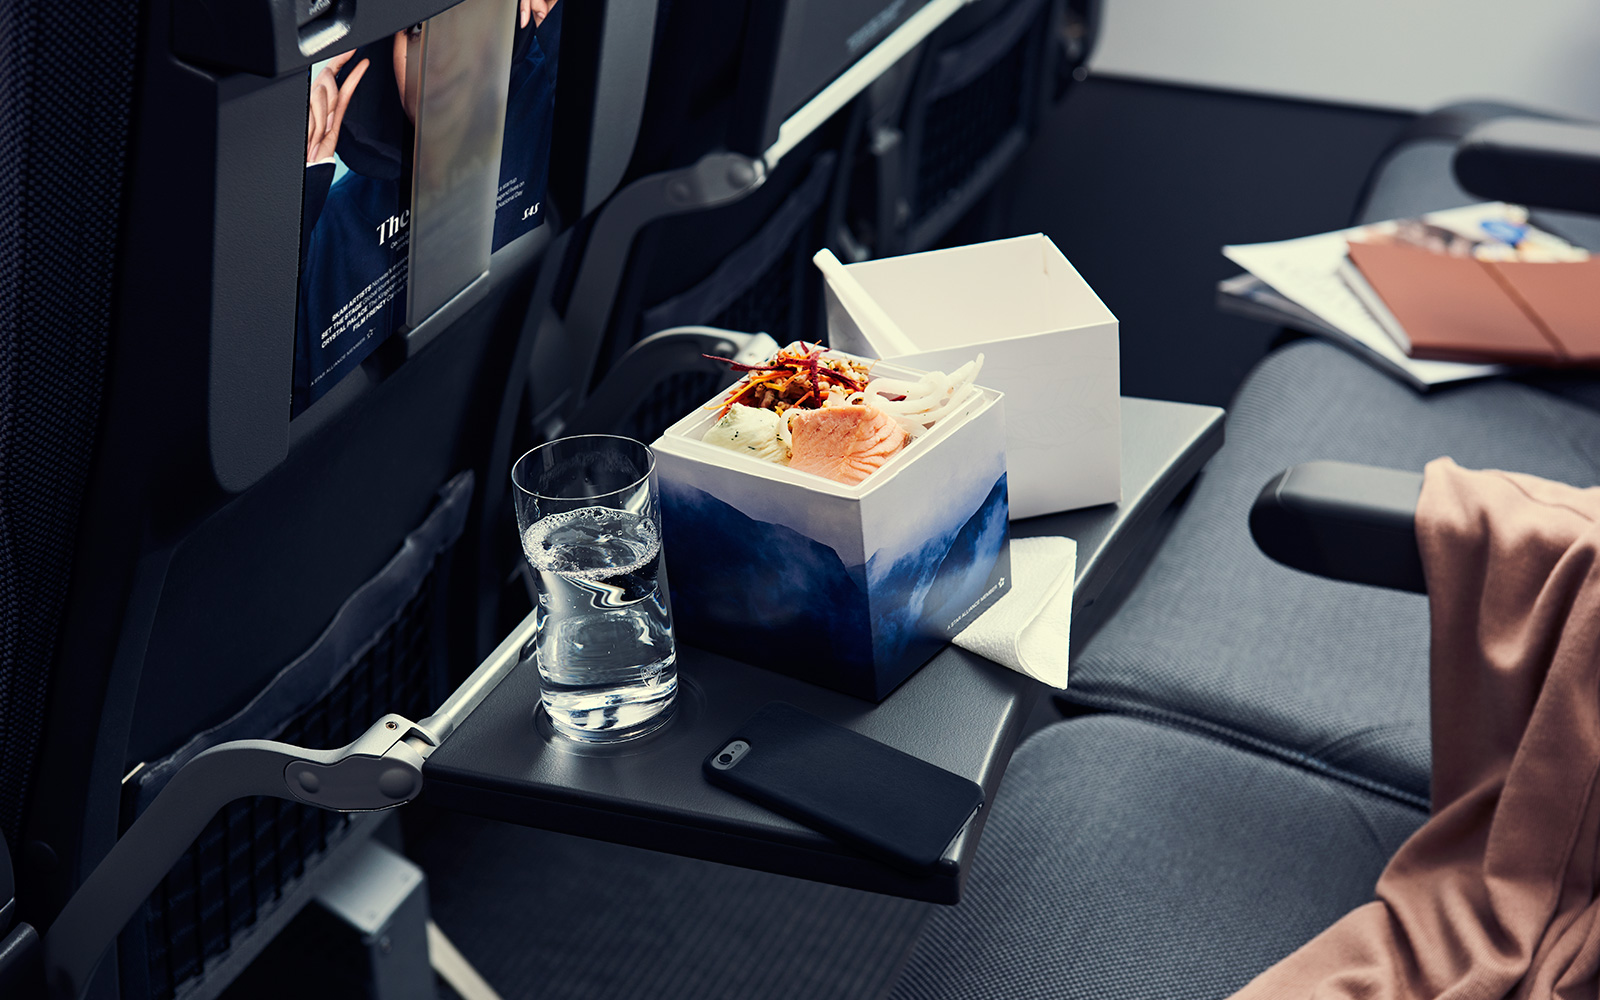 scandinavian airlines moments of truth